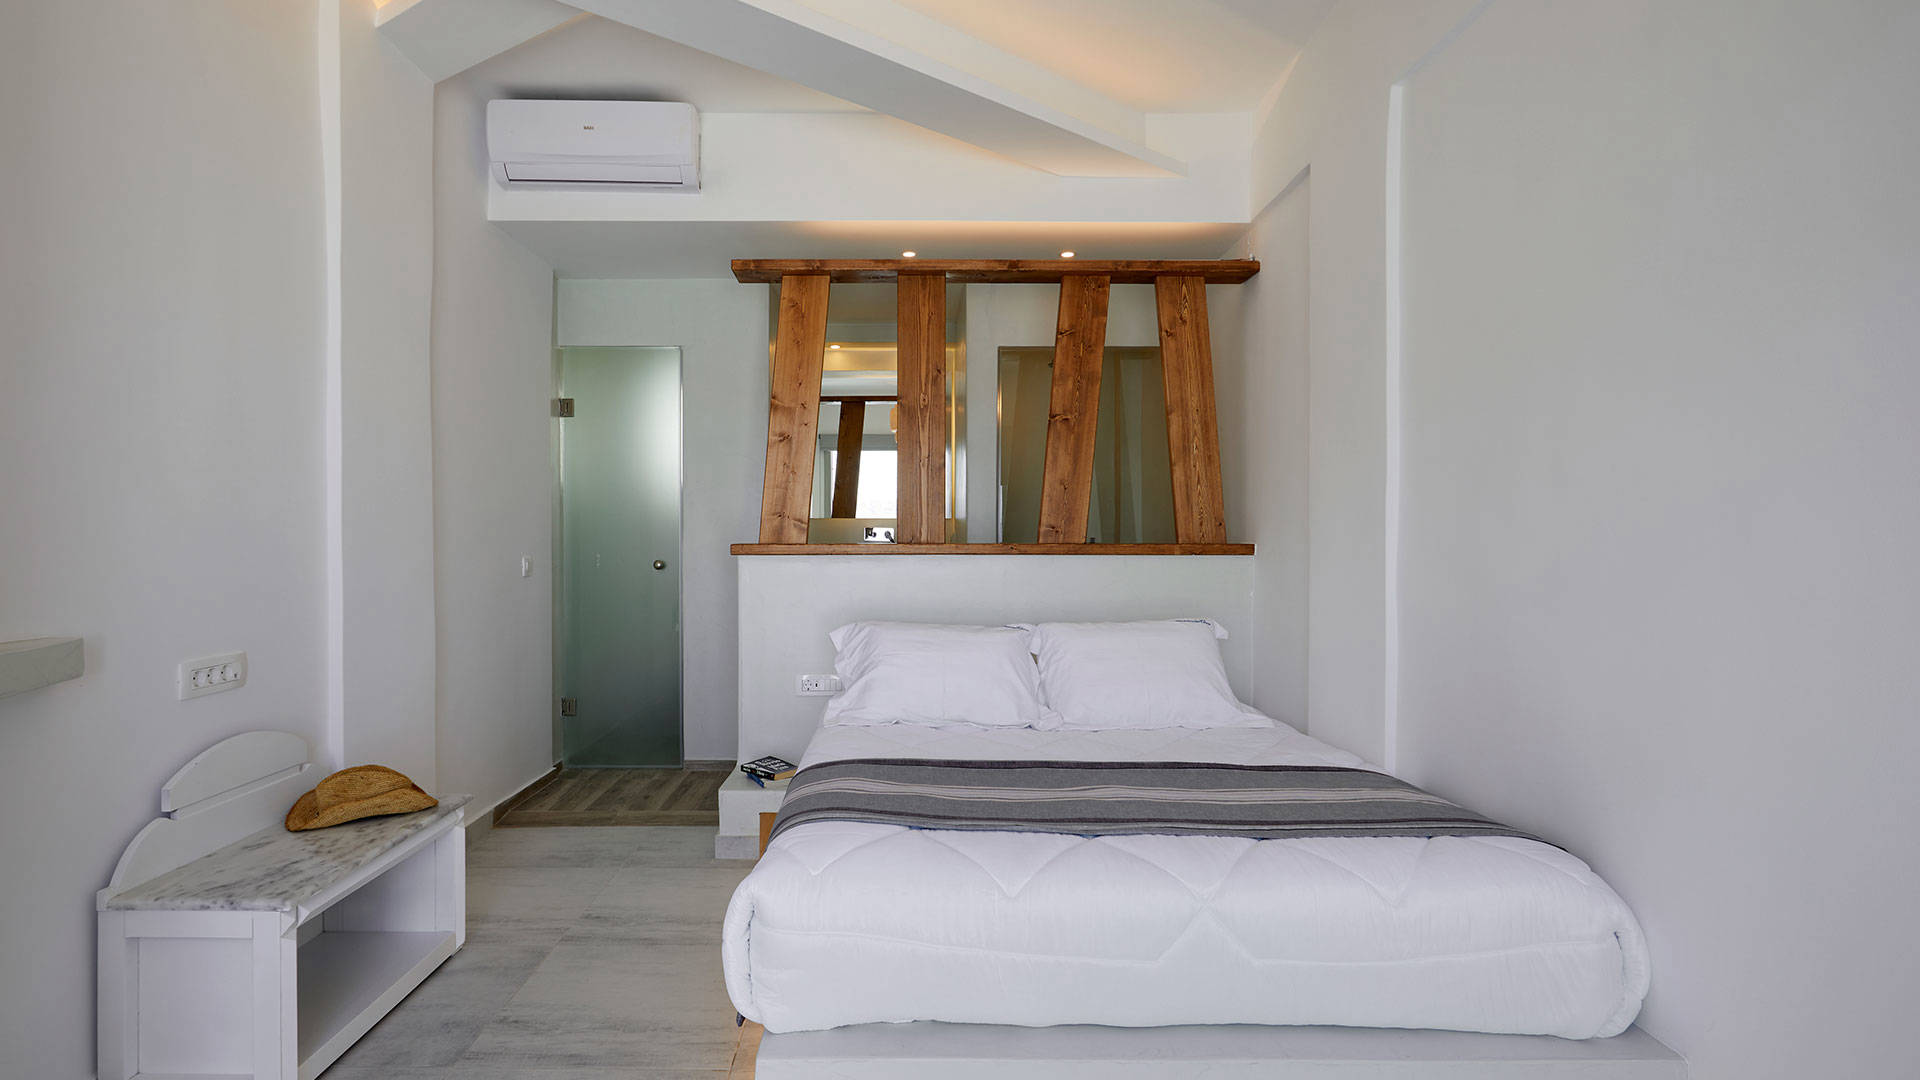 
Santorini View Hotel double bed with white linen and grey coverlet, and wooden decoration